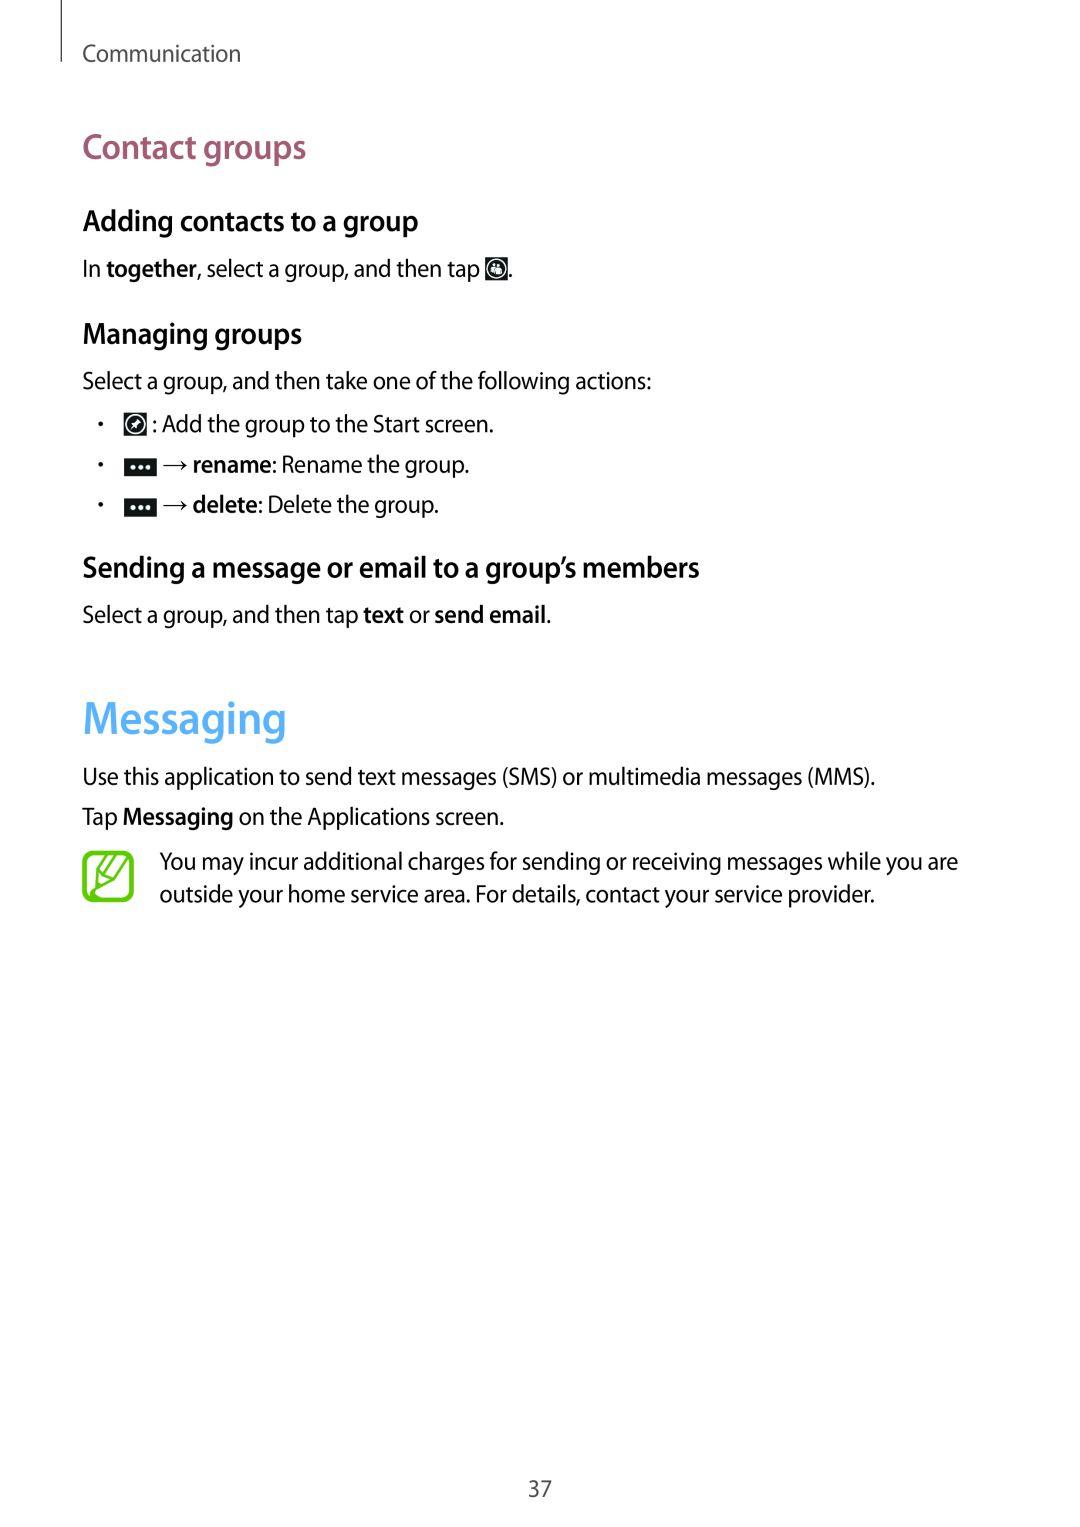 Samsung GT-I8750ALAXEH manual Messaging, Contact groups, Adding contacts to a group, Managing groups, Communication 